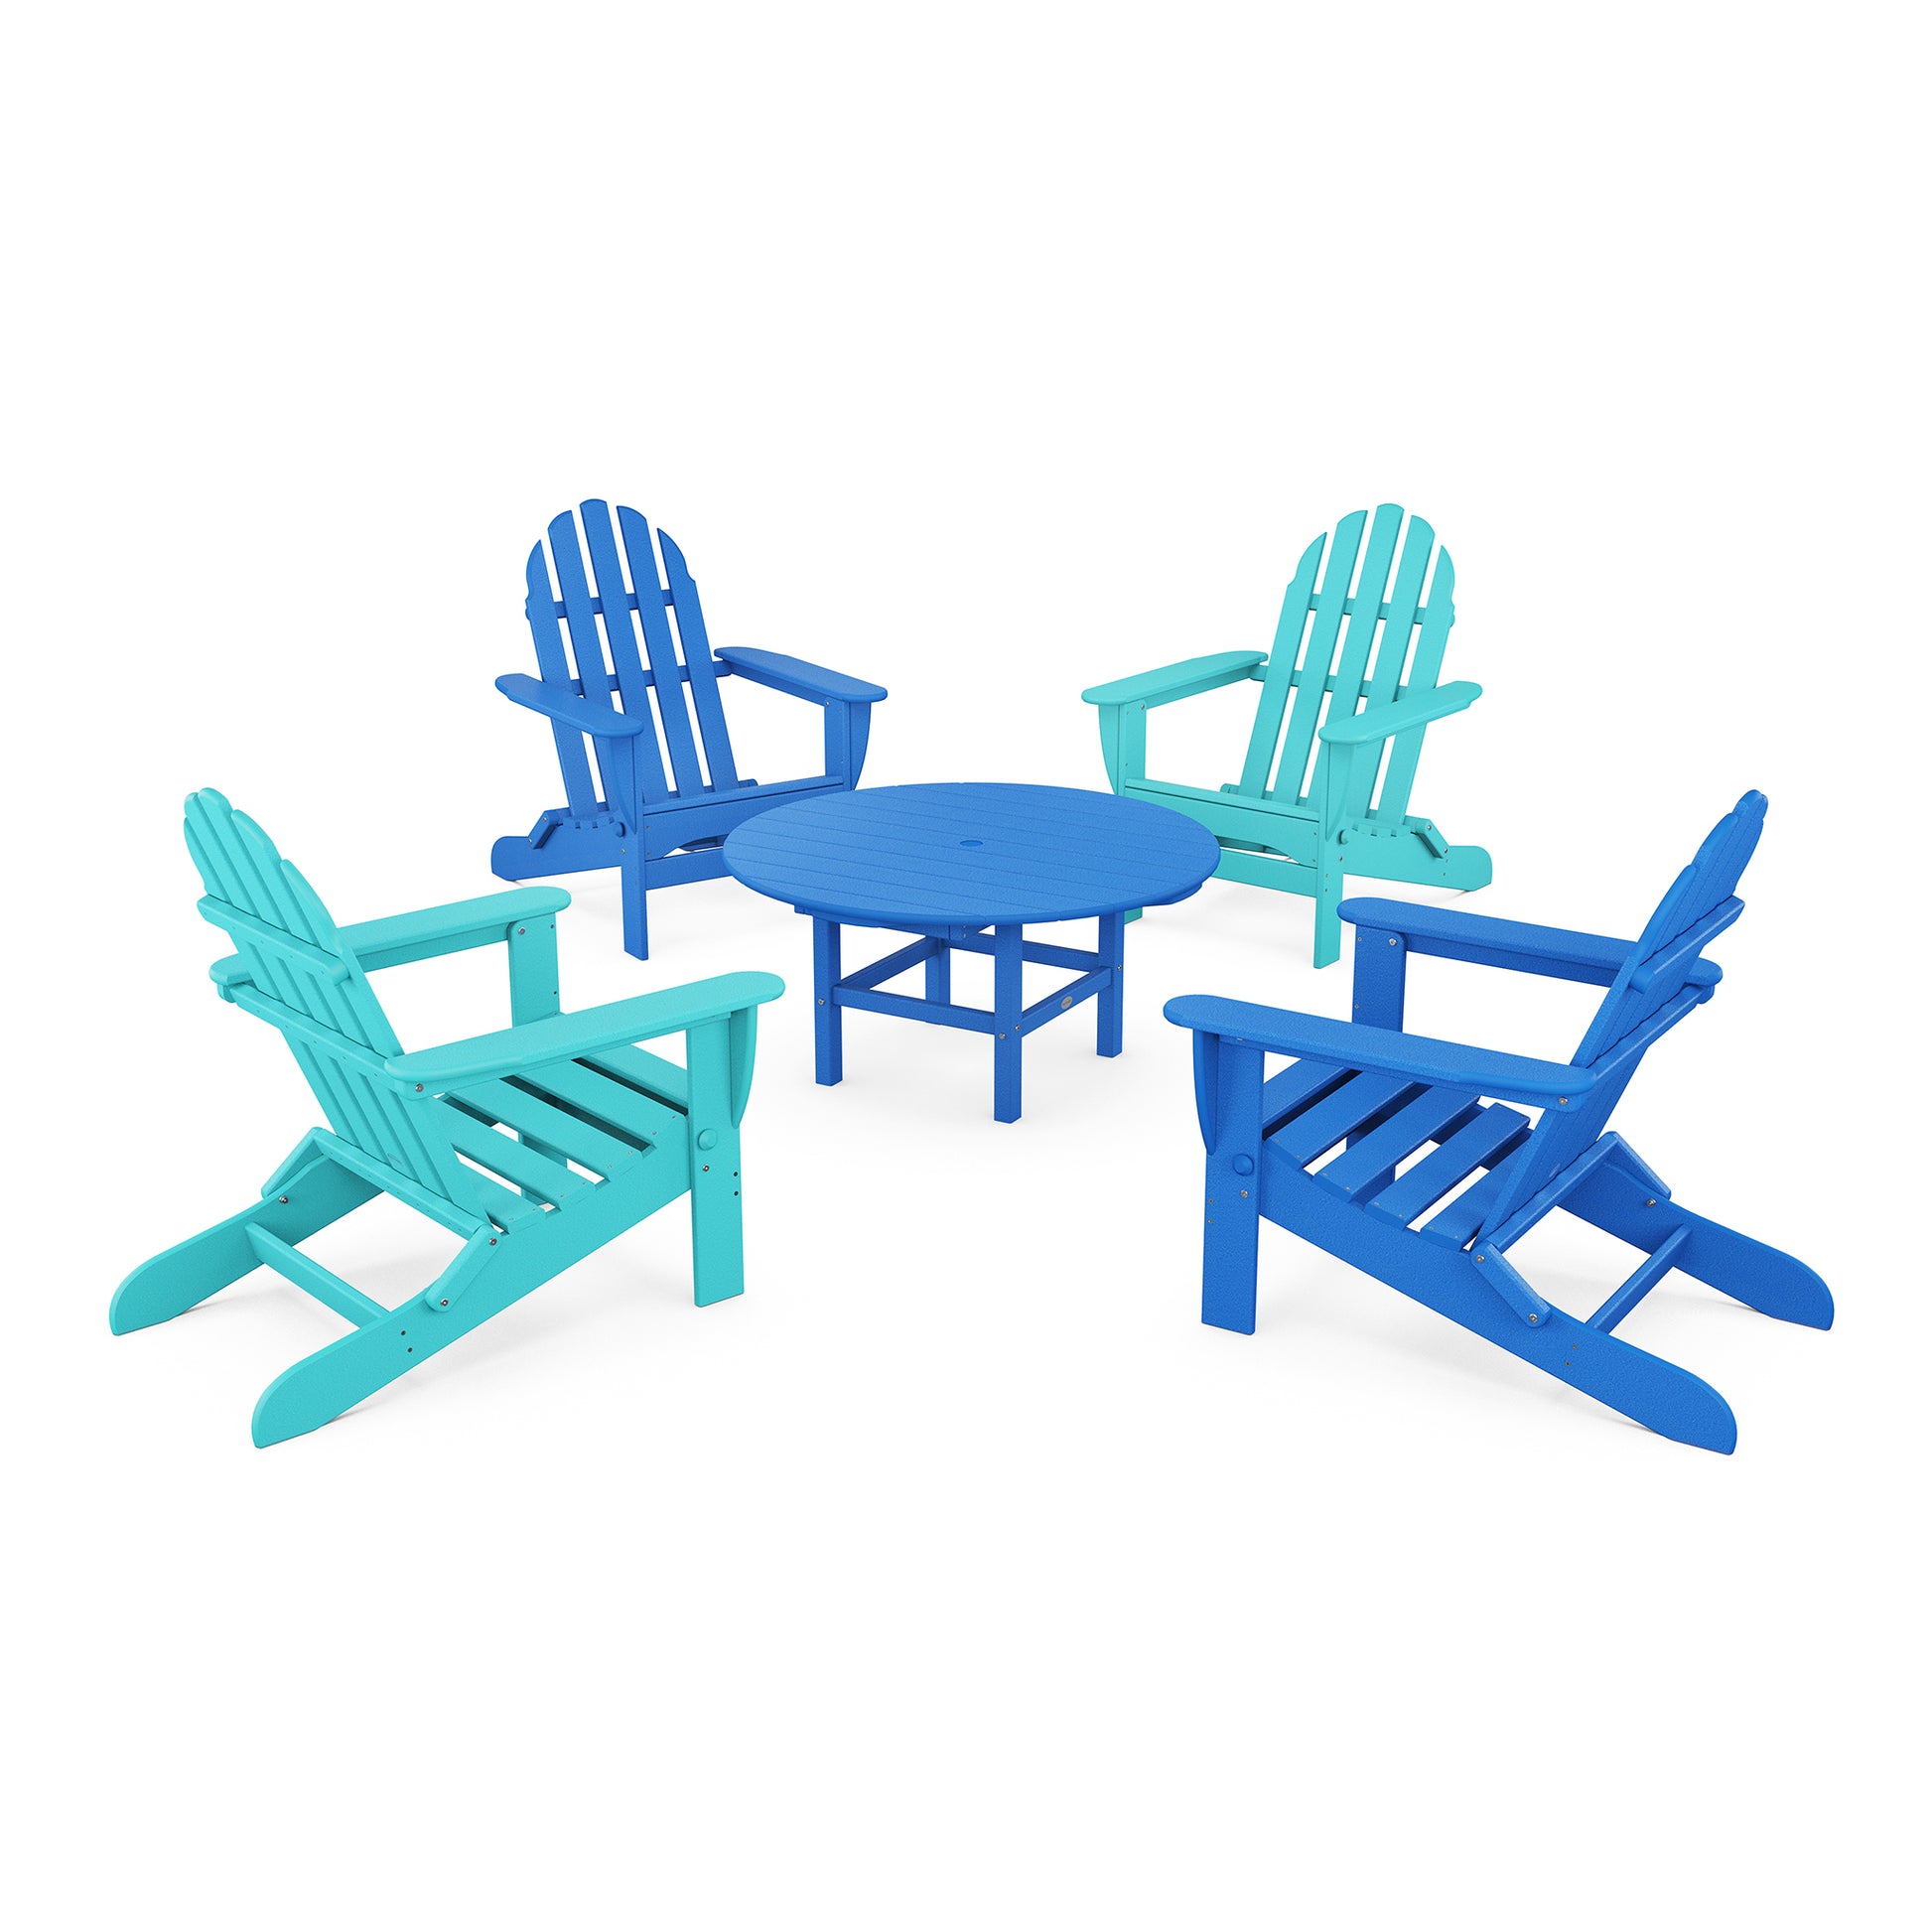 Four colorful POLYWOOD Classic Folding Adirondack chairs in teal and blue arranged around a small round matching table, isolated on a white background.